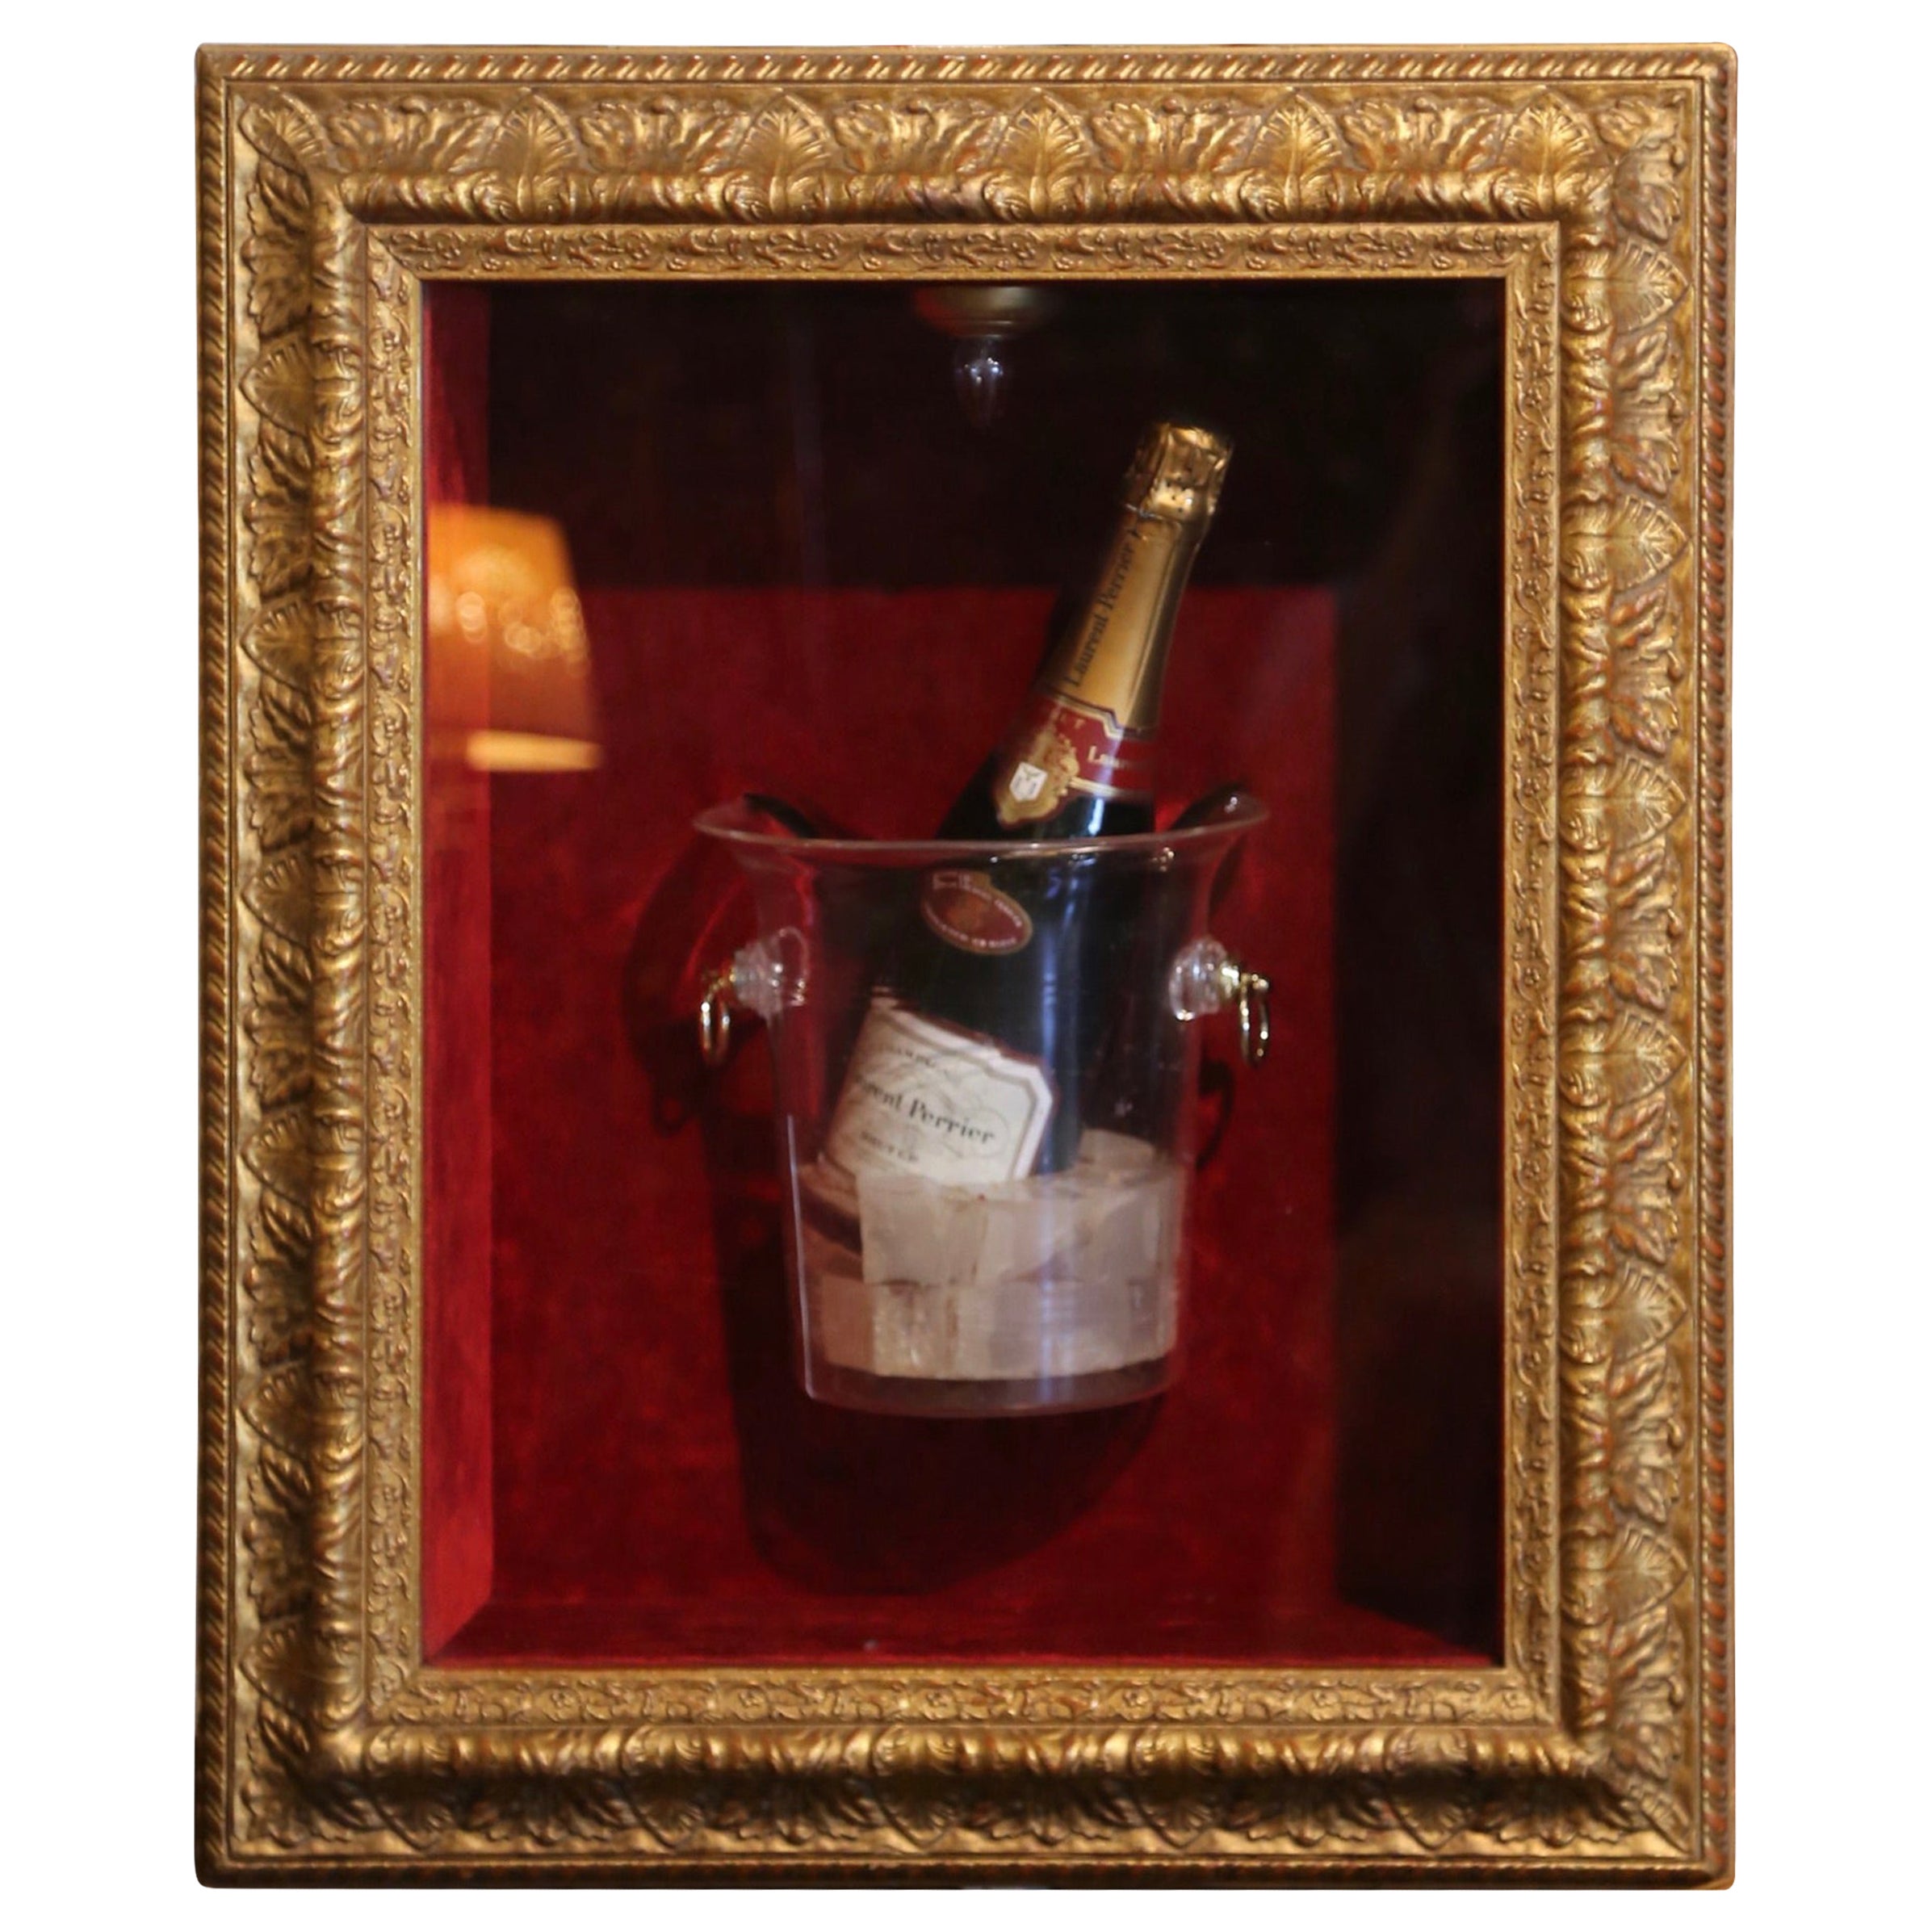 Laurent-Perrier Bottle in Ice Bucket Wall Display Case in Light Up Gilt Frame 